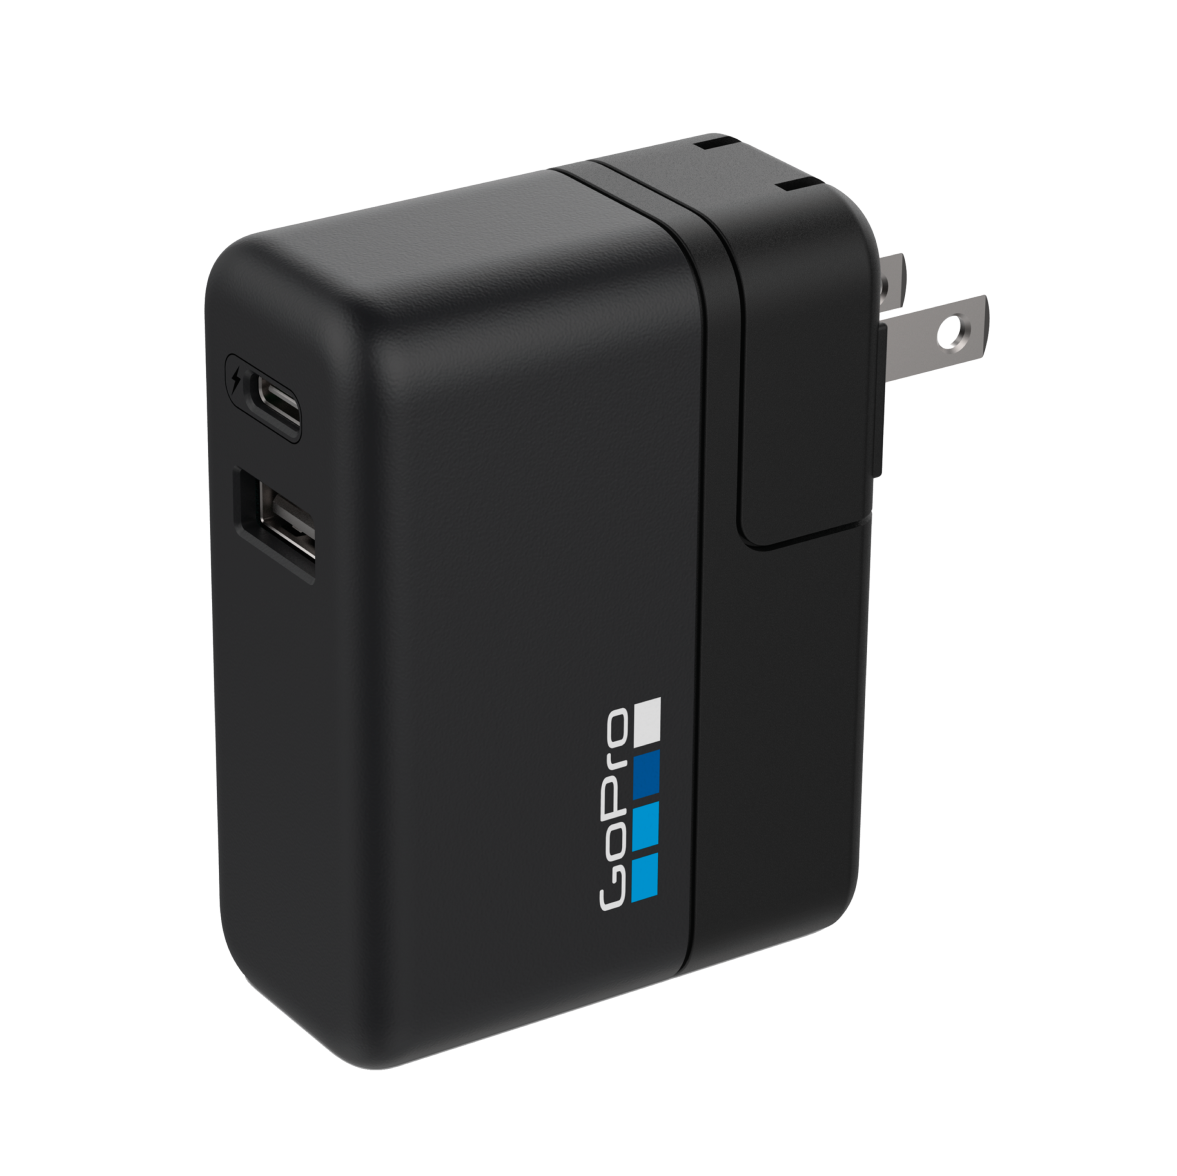 Supercharger International Dual-Port Charger